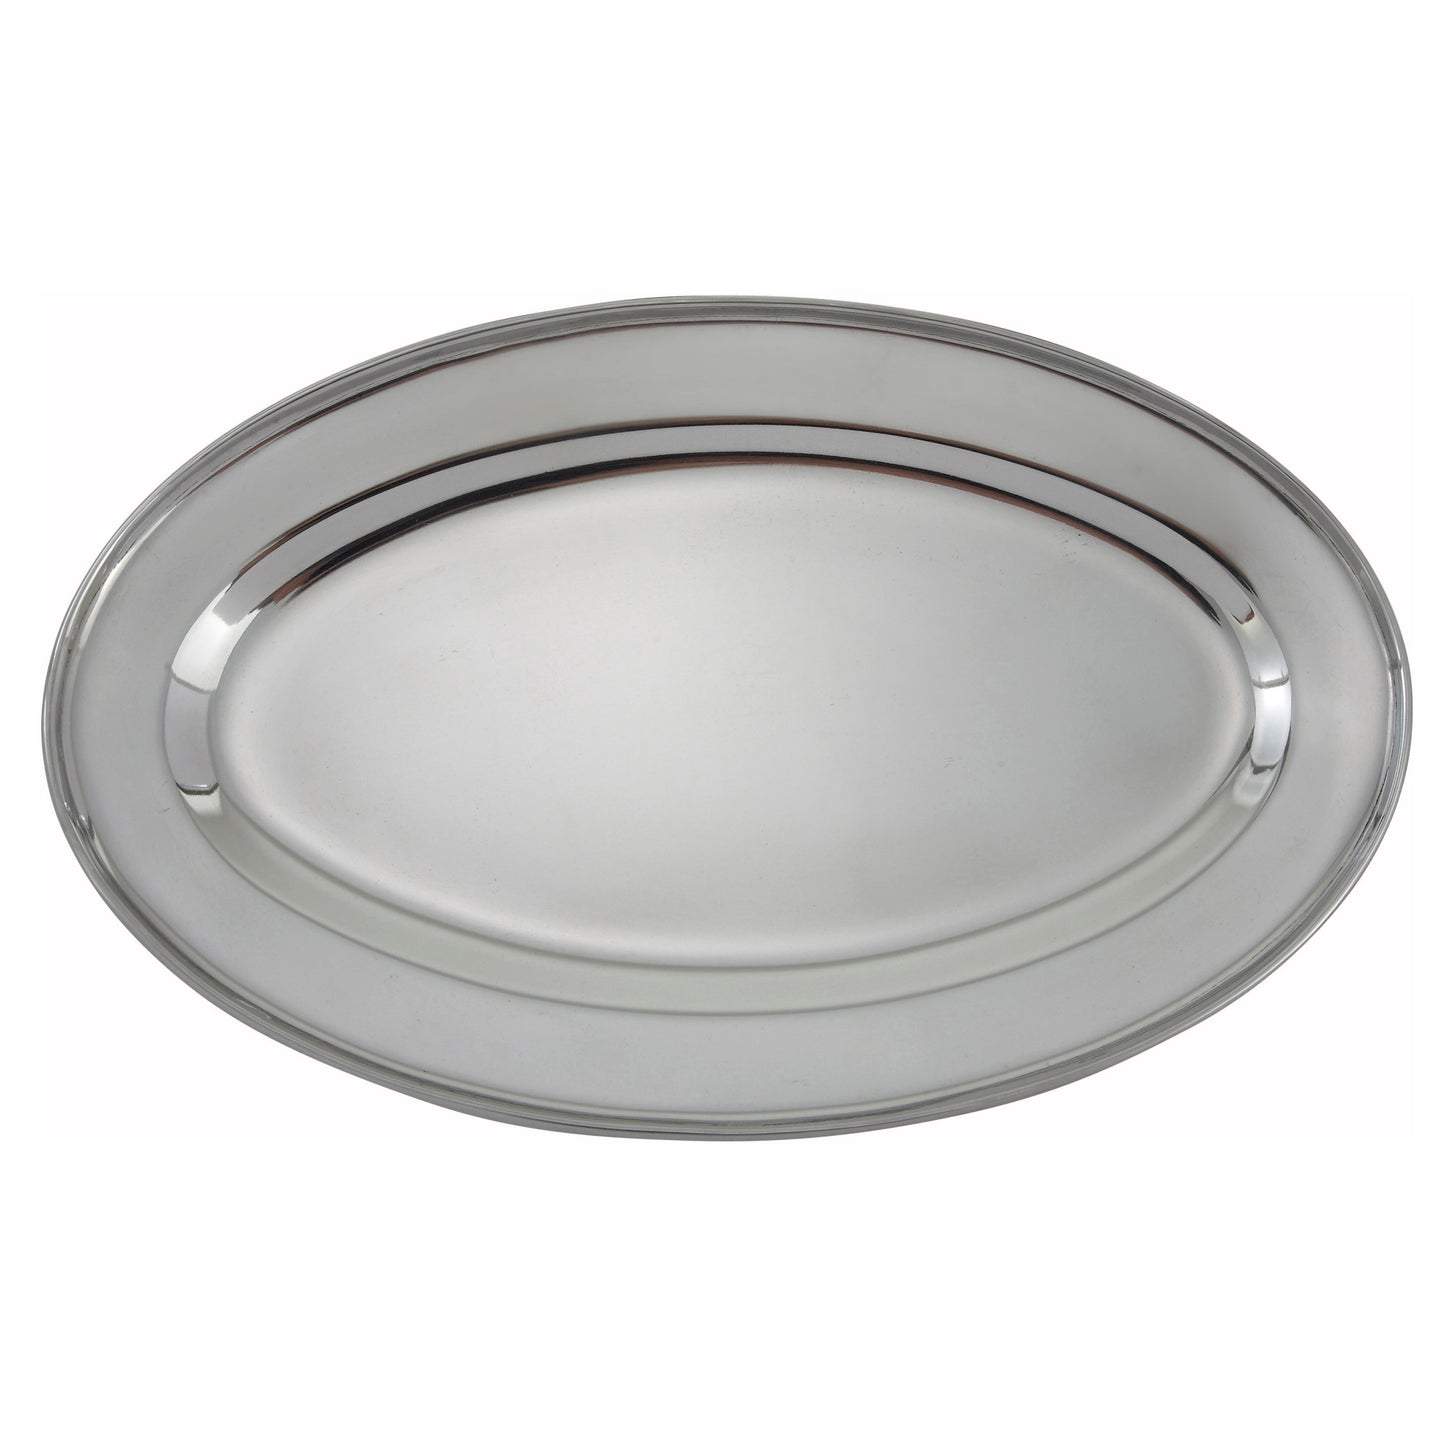 OPL-12 - Oval Platter, Stainless Steel - 12"